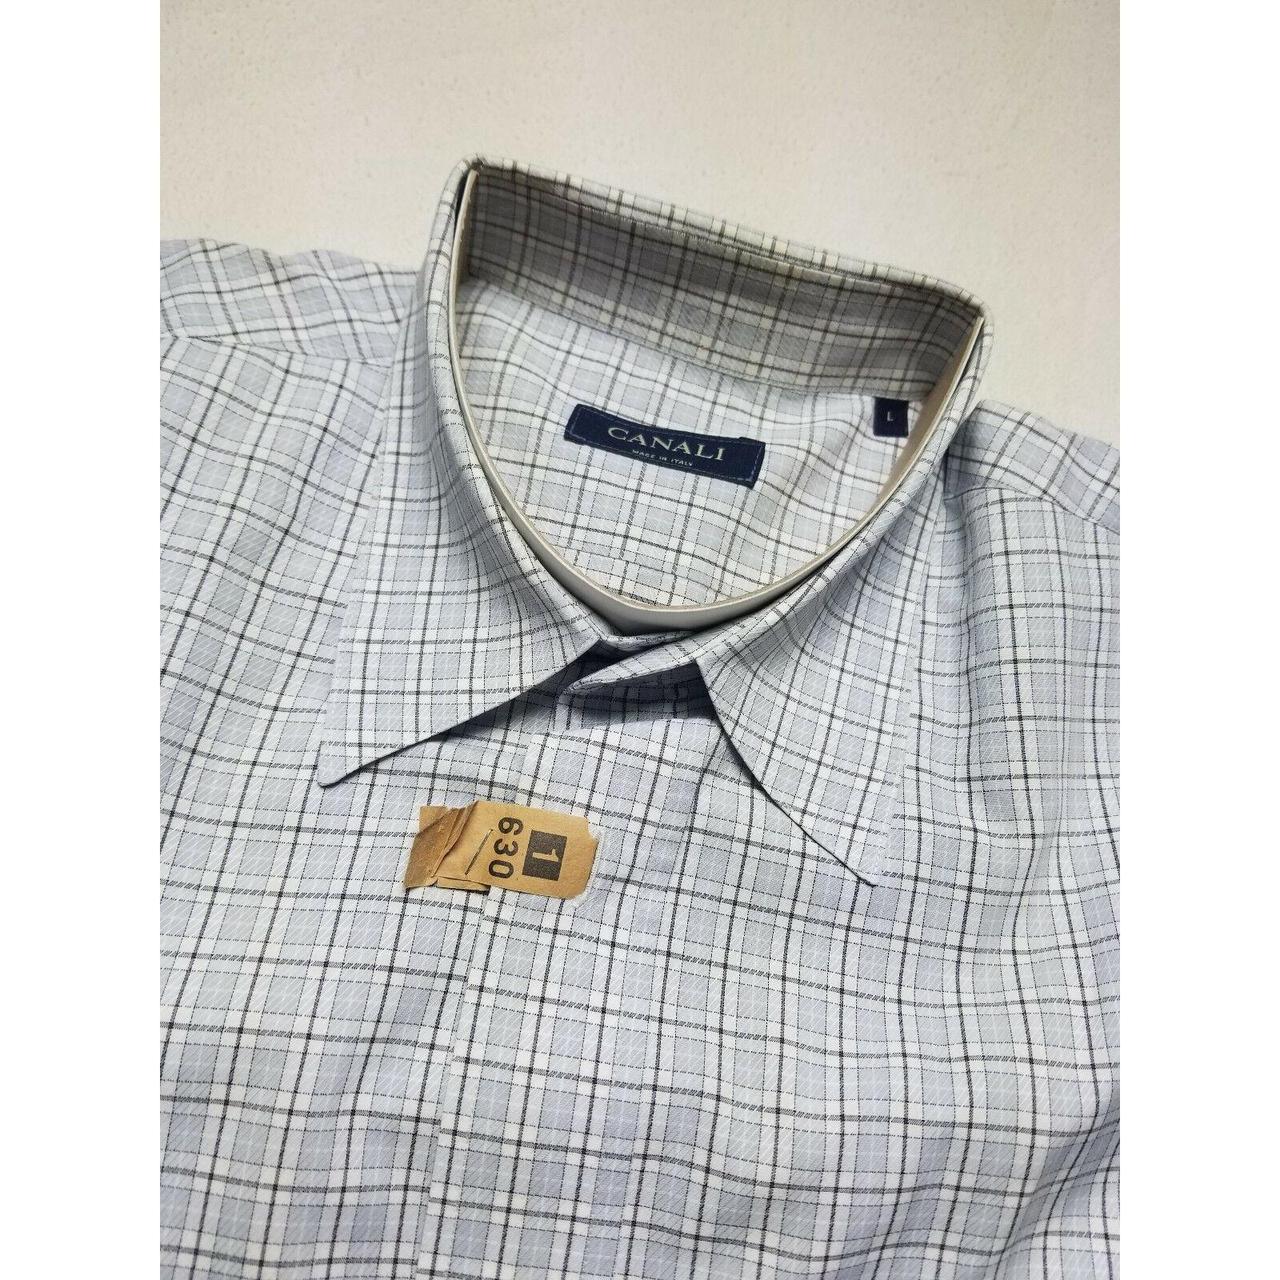 Product Image 2 - Canali Men's Shirt Made in